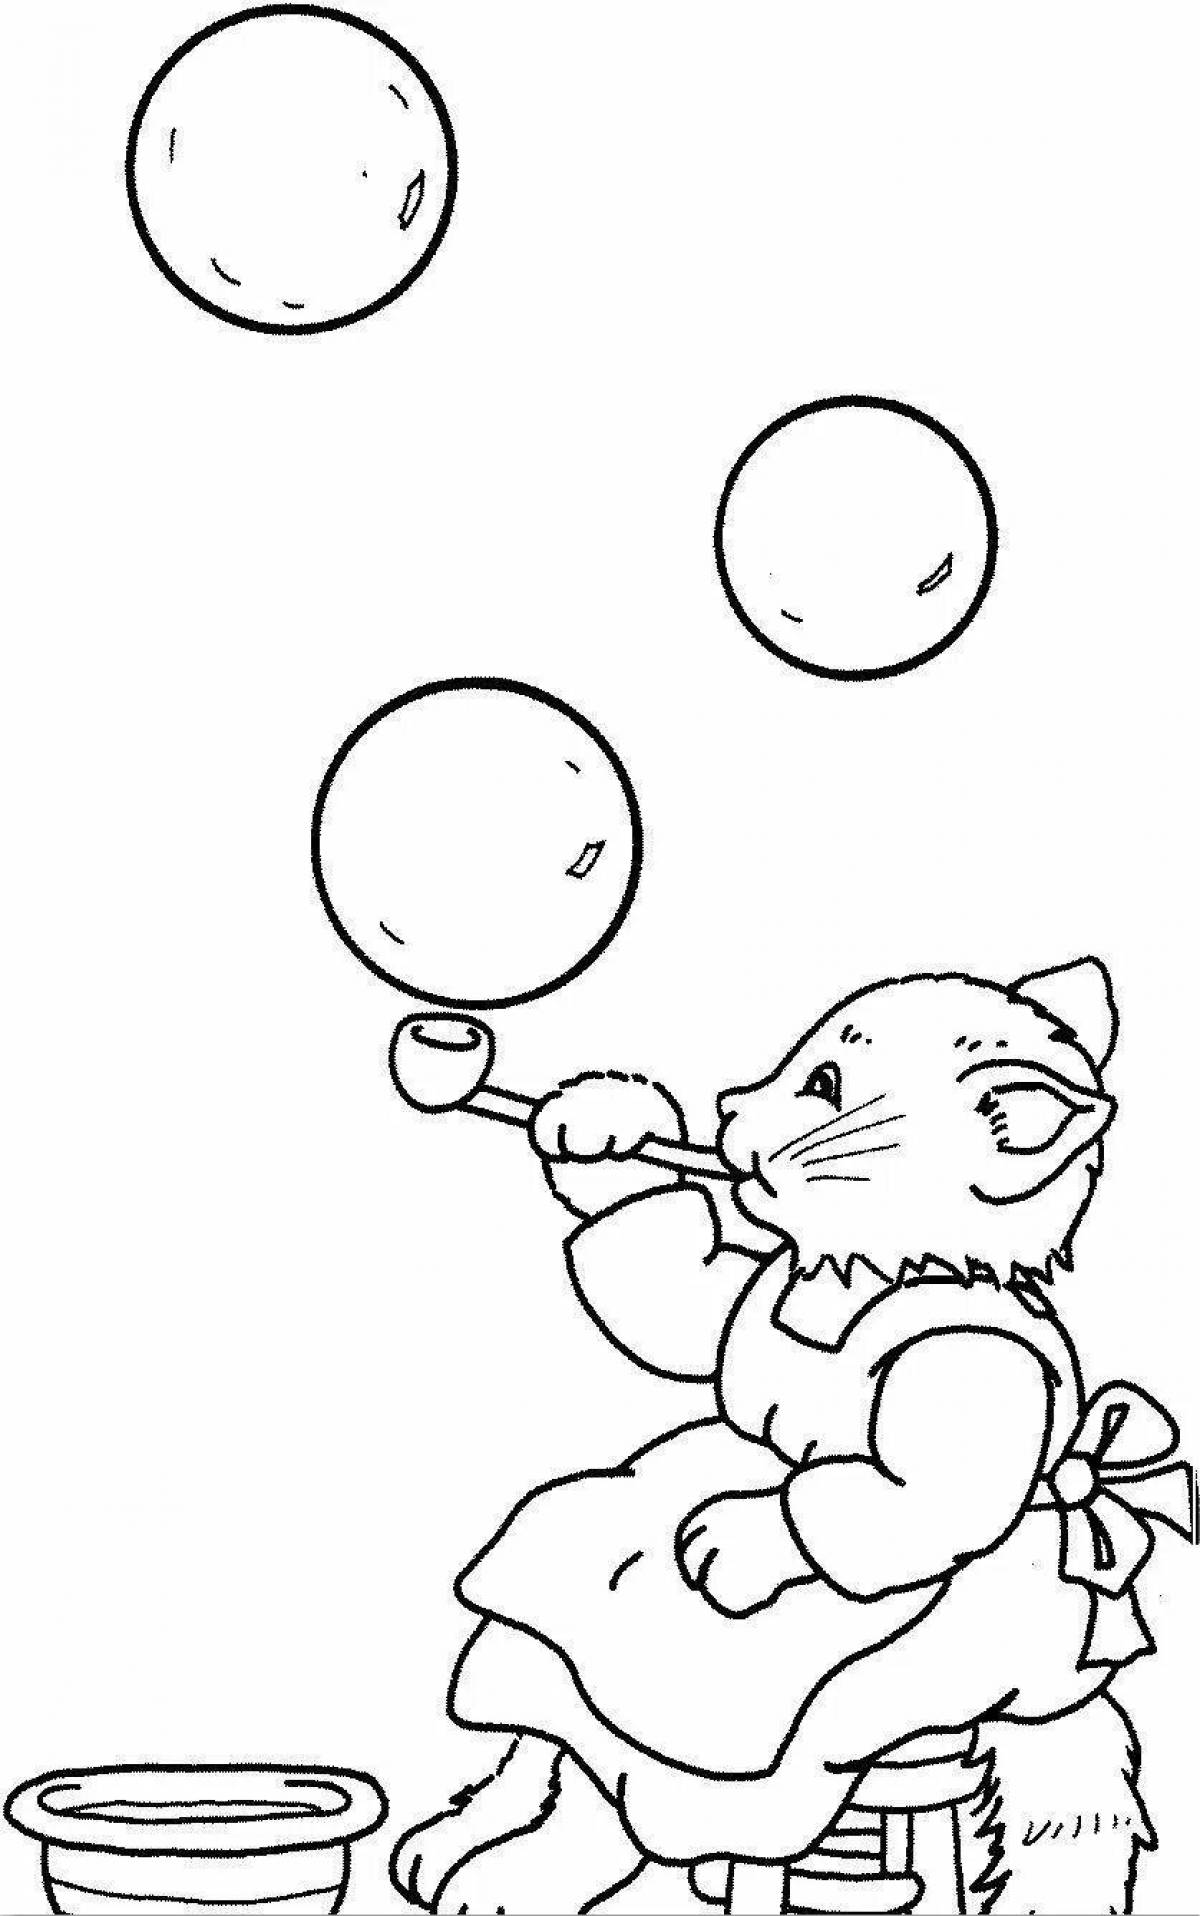 Giggling cat with balloons